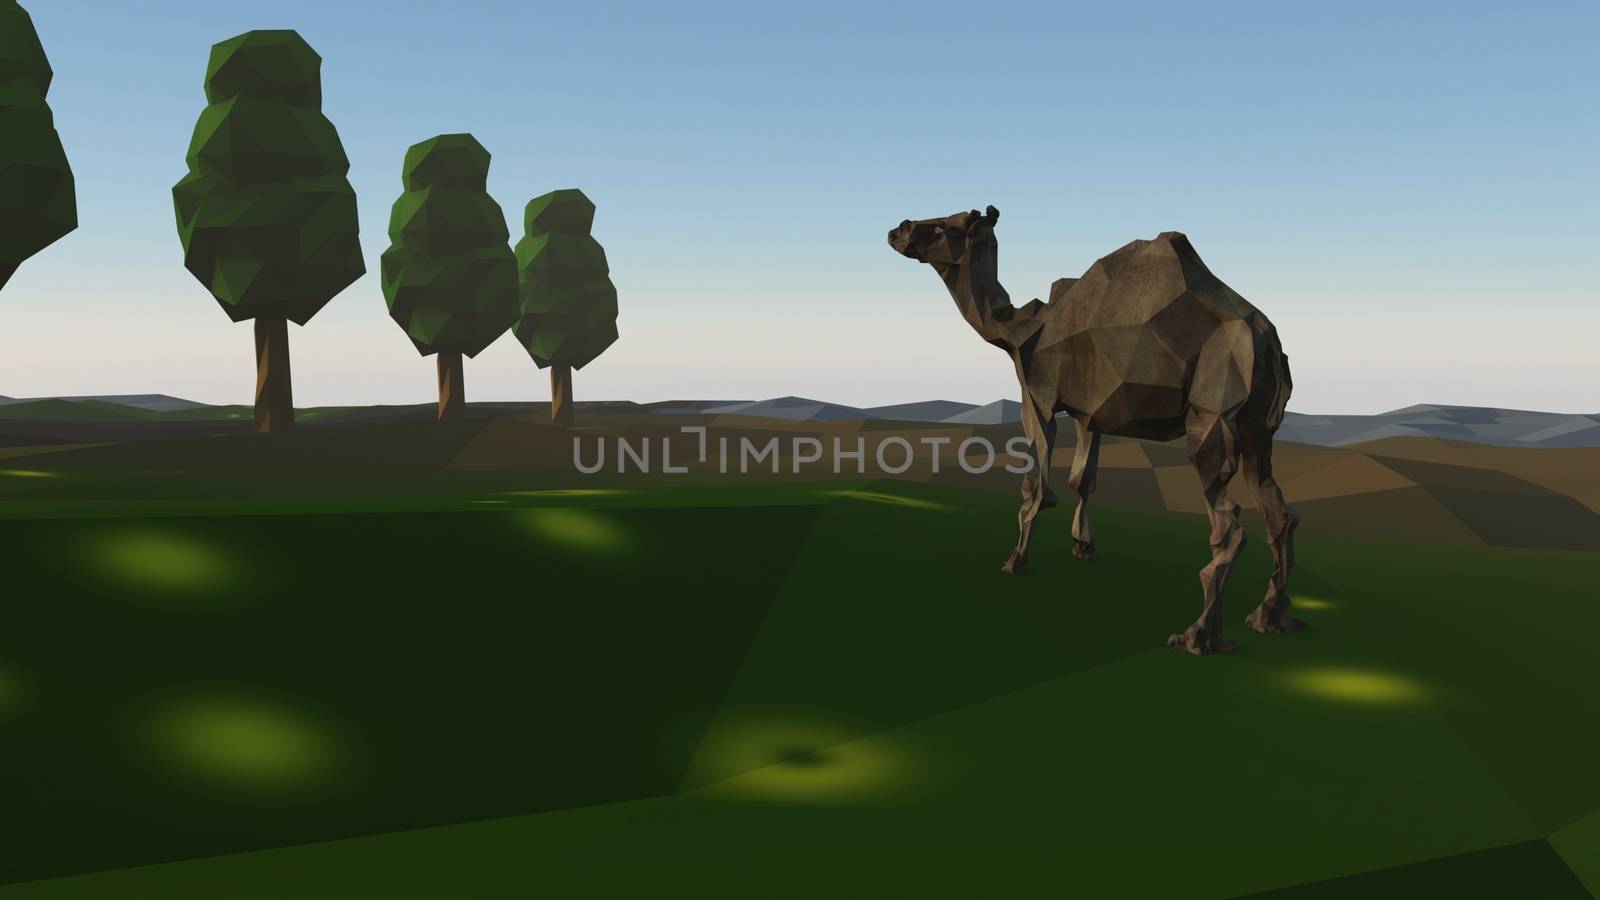 3d rendering of group of low poly stylized trees and a camel. with realistic shadows on white background. 